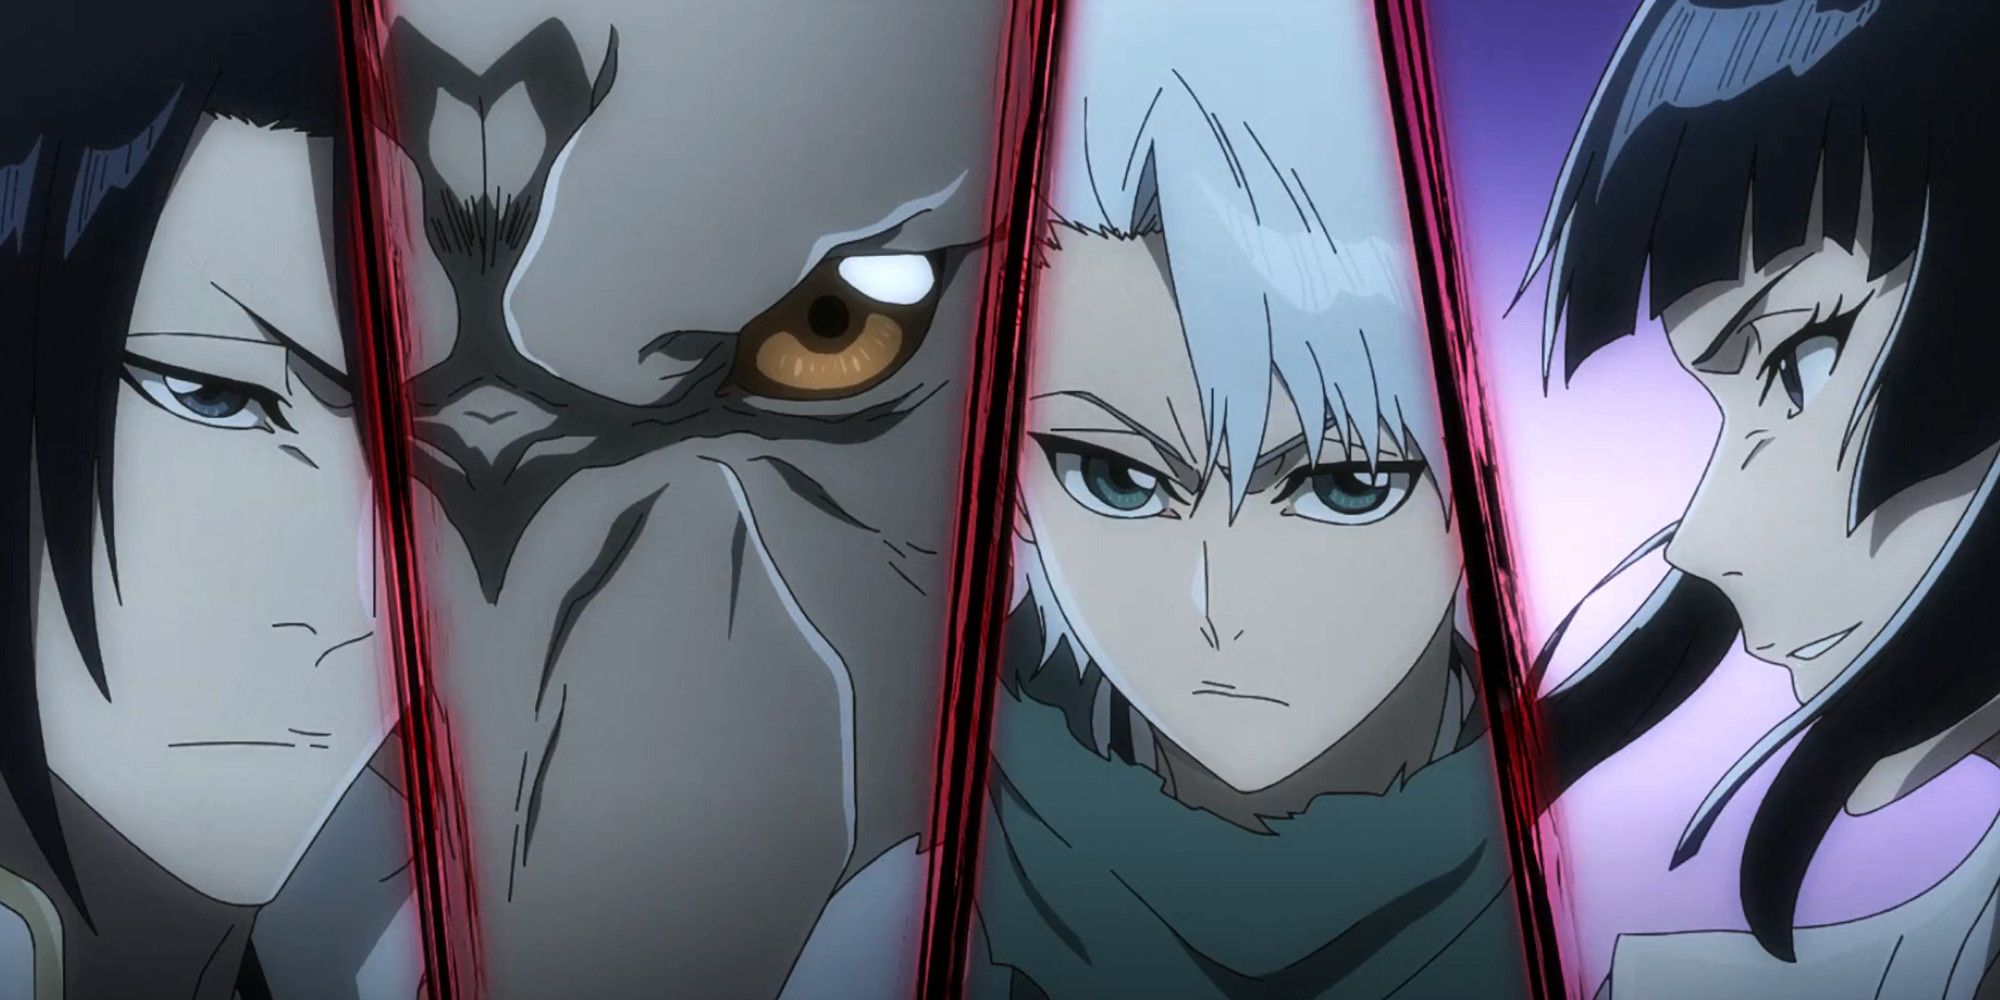 Bleach TYBW episode 23 preview hints at Hitsugaya going against the  shinigami